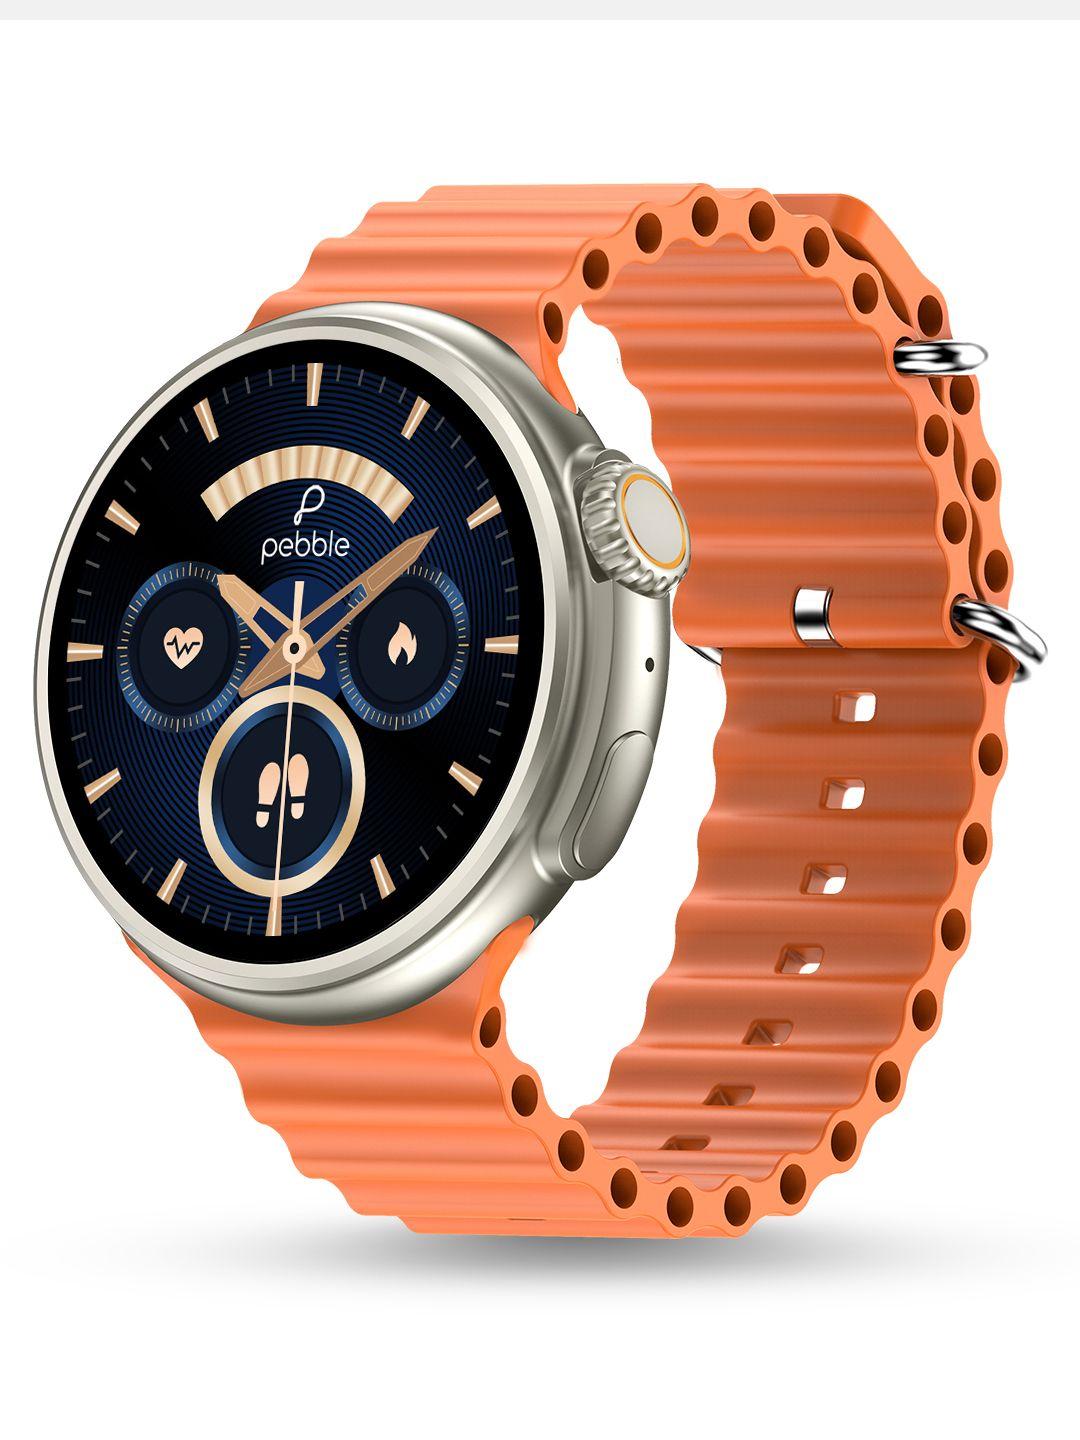 pebble Orange Forte Smartwatch with 1.5" HD Display